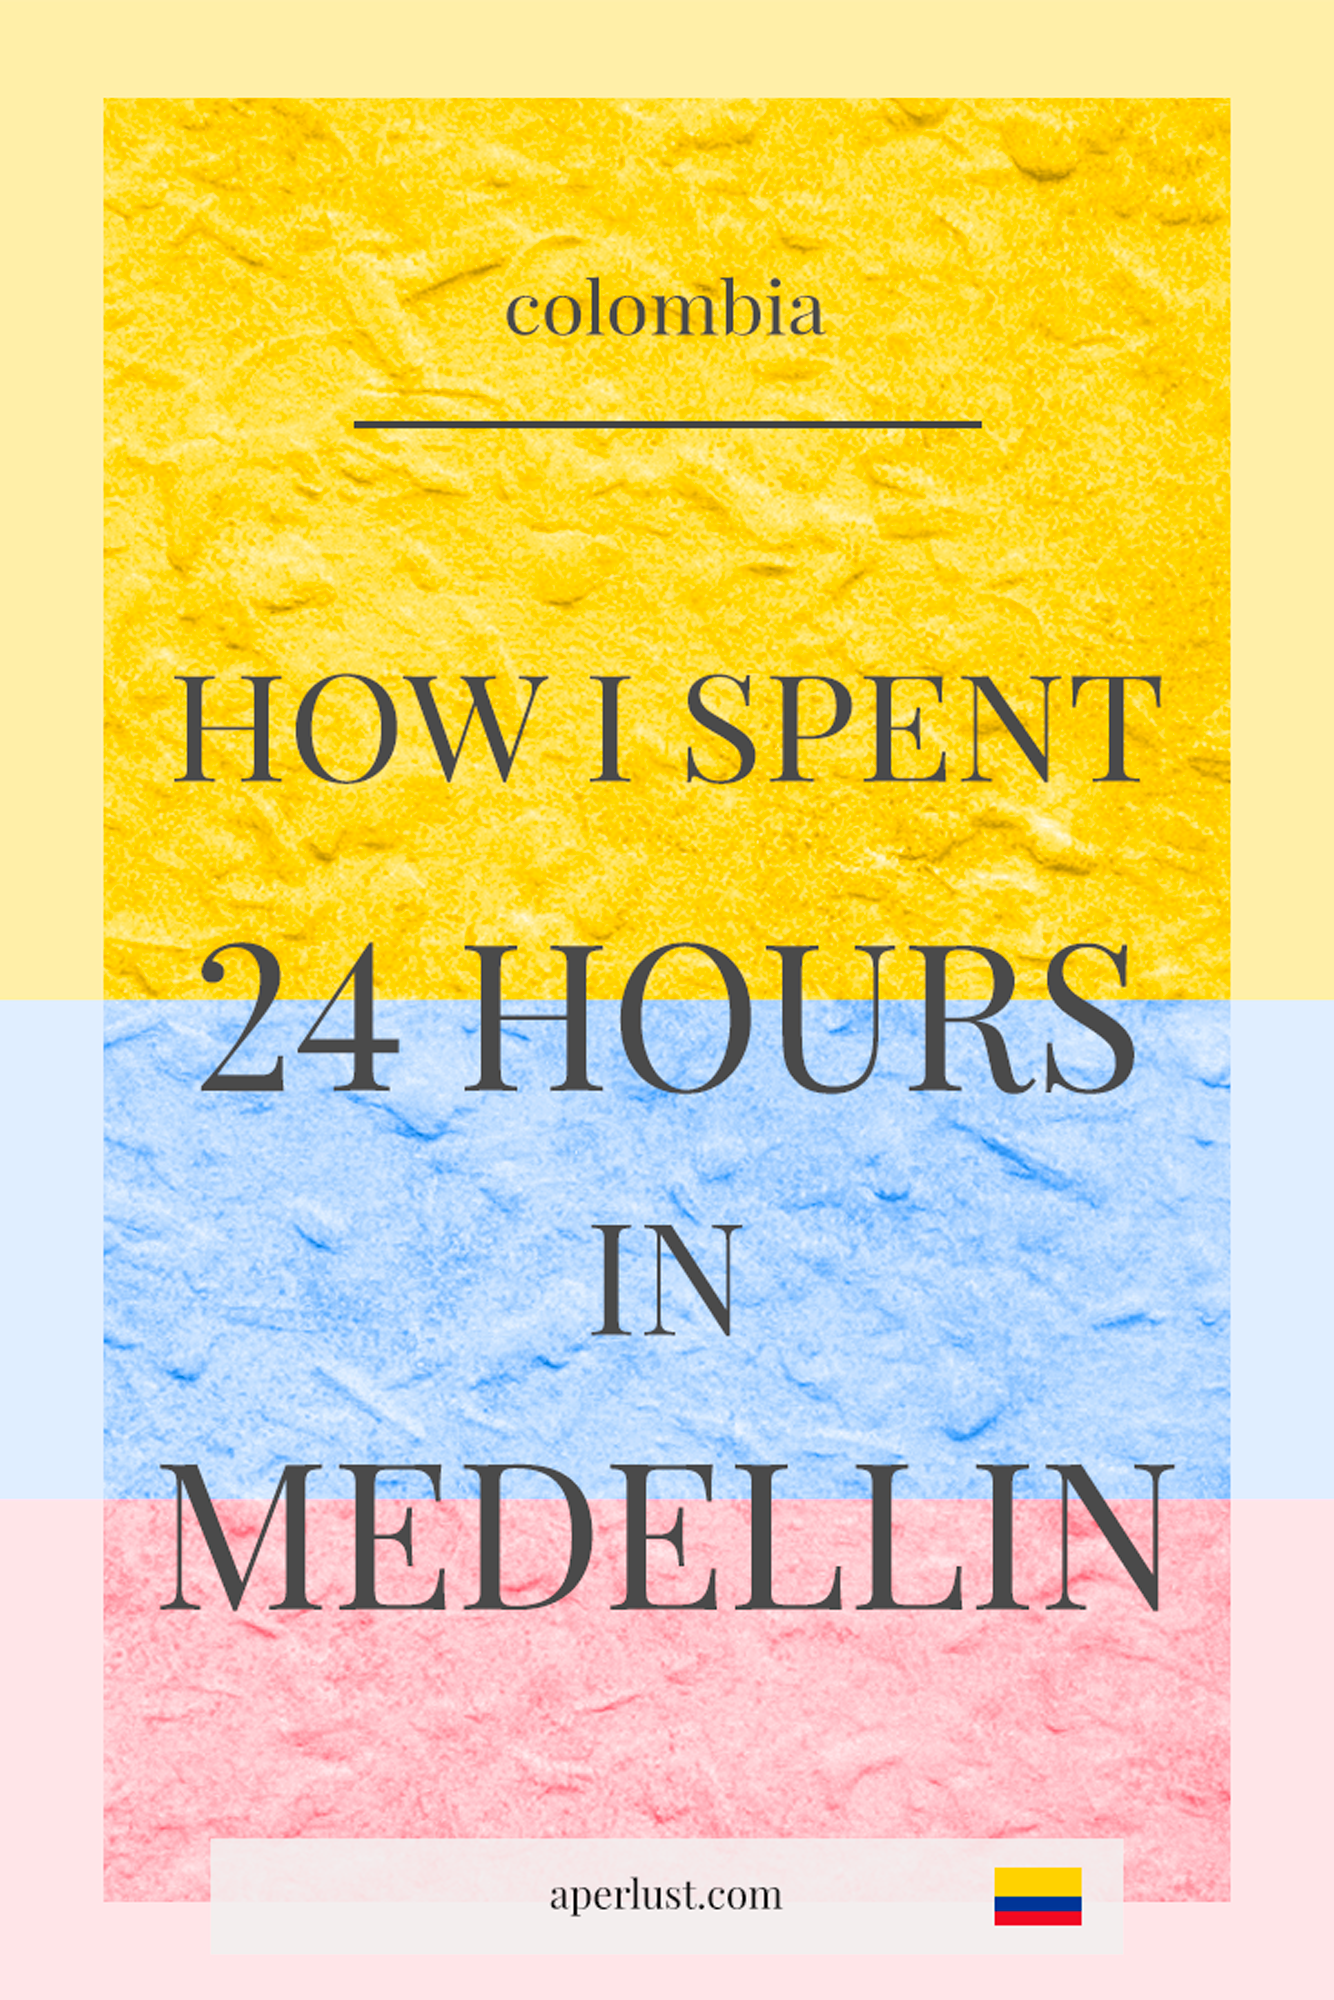 How I spend 24 hours in Medellin